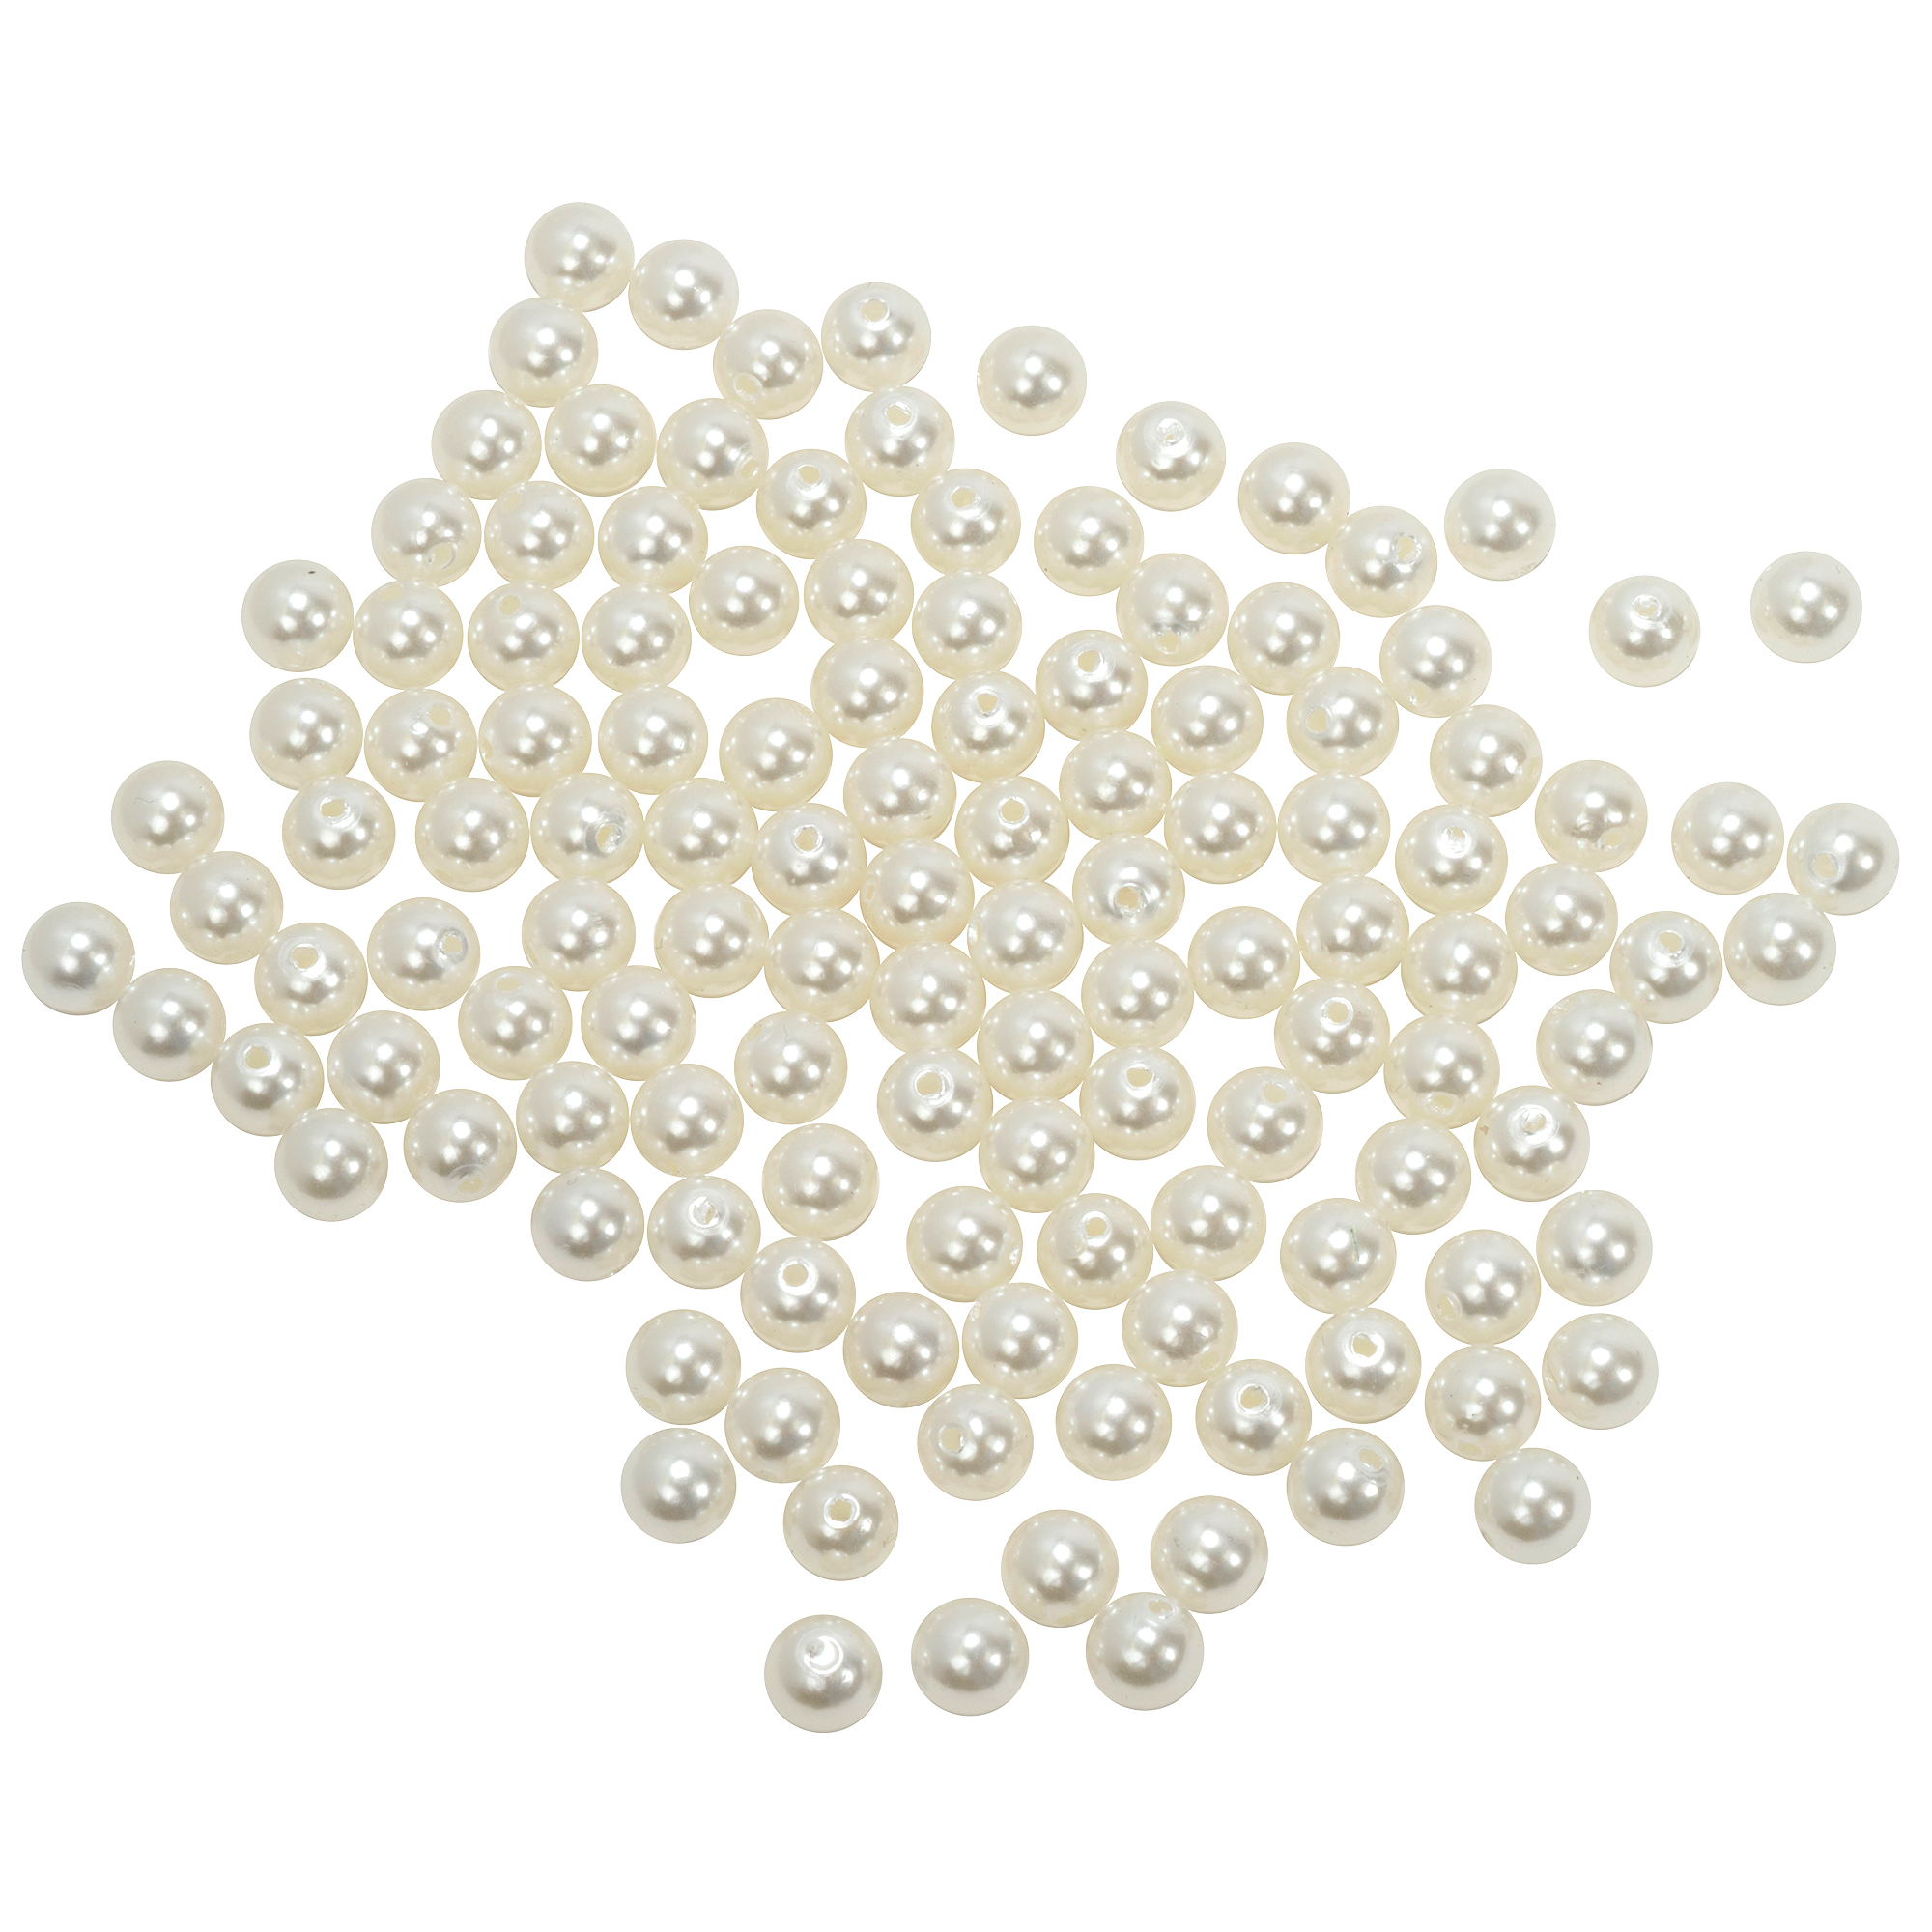 10mm Craft Pearl Beads With Hole 454g/Bag - Ivory